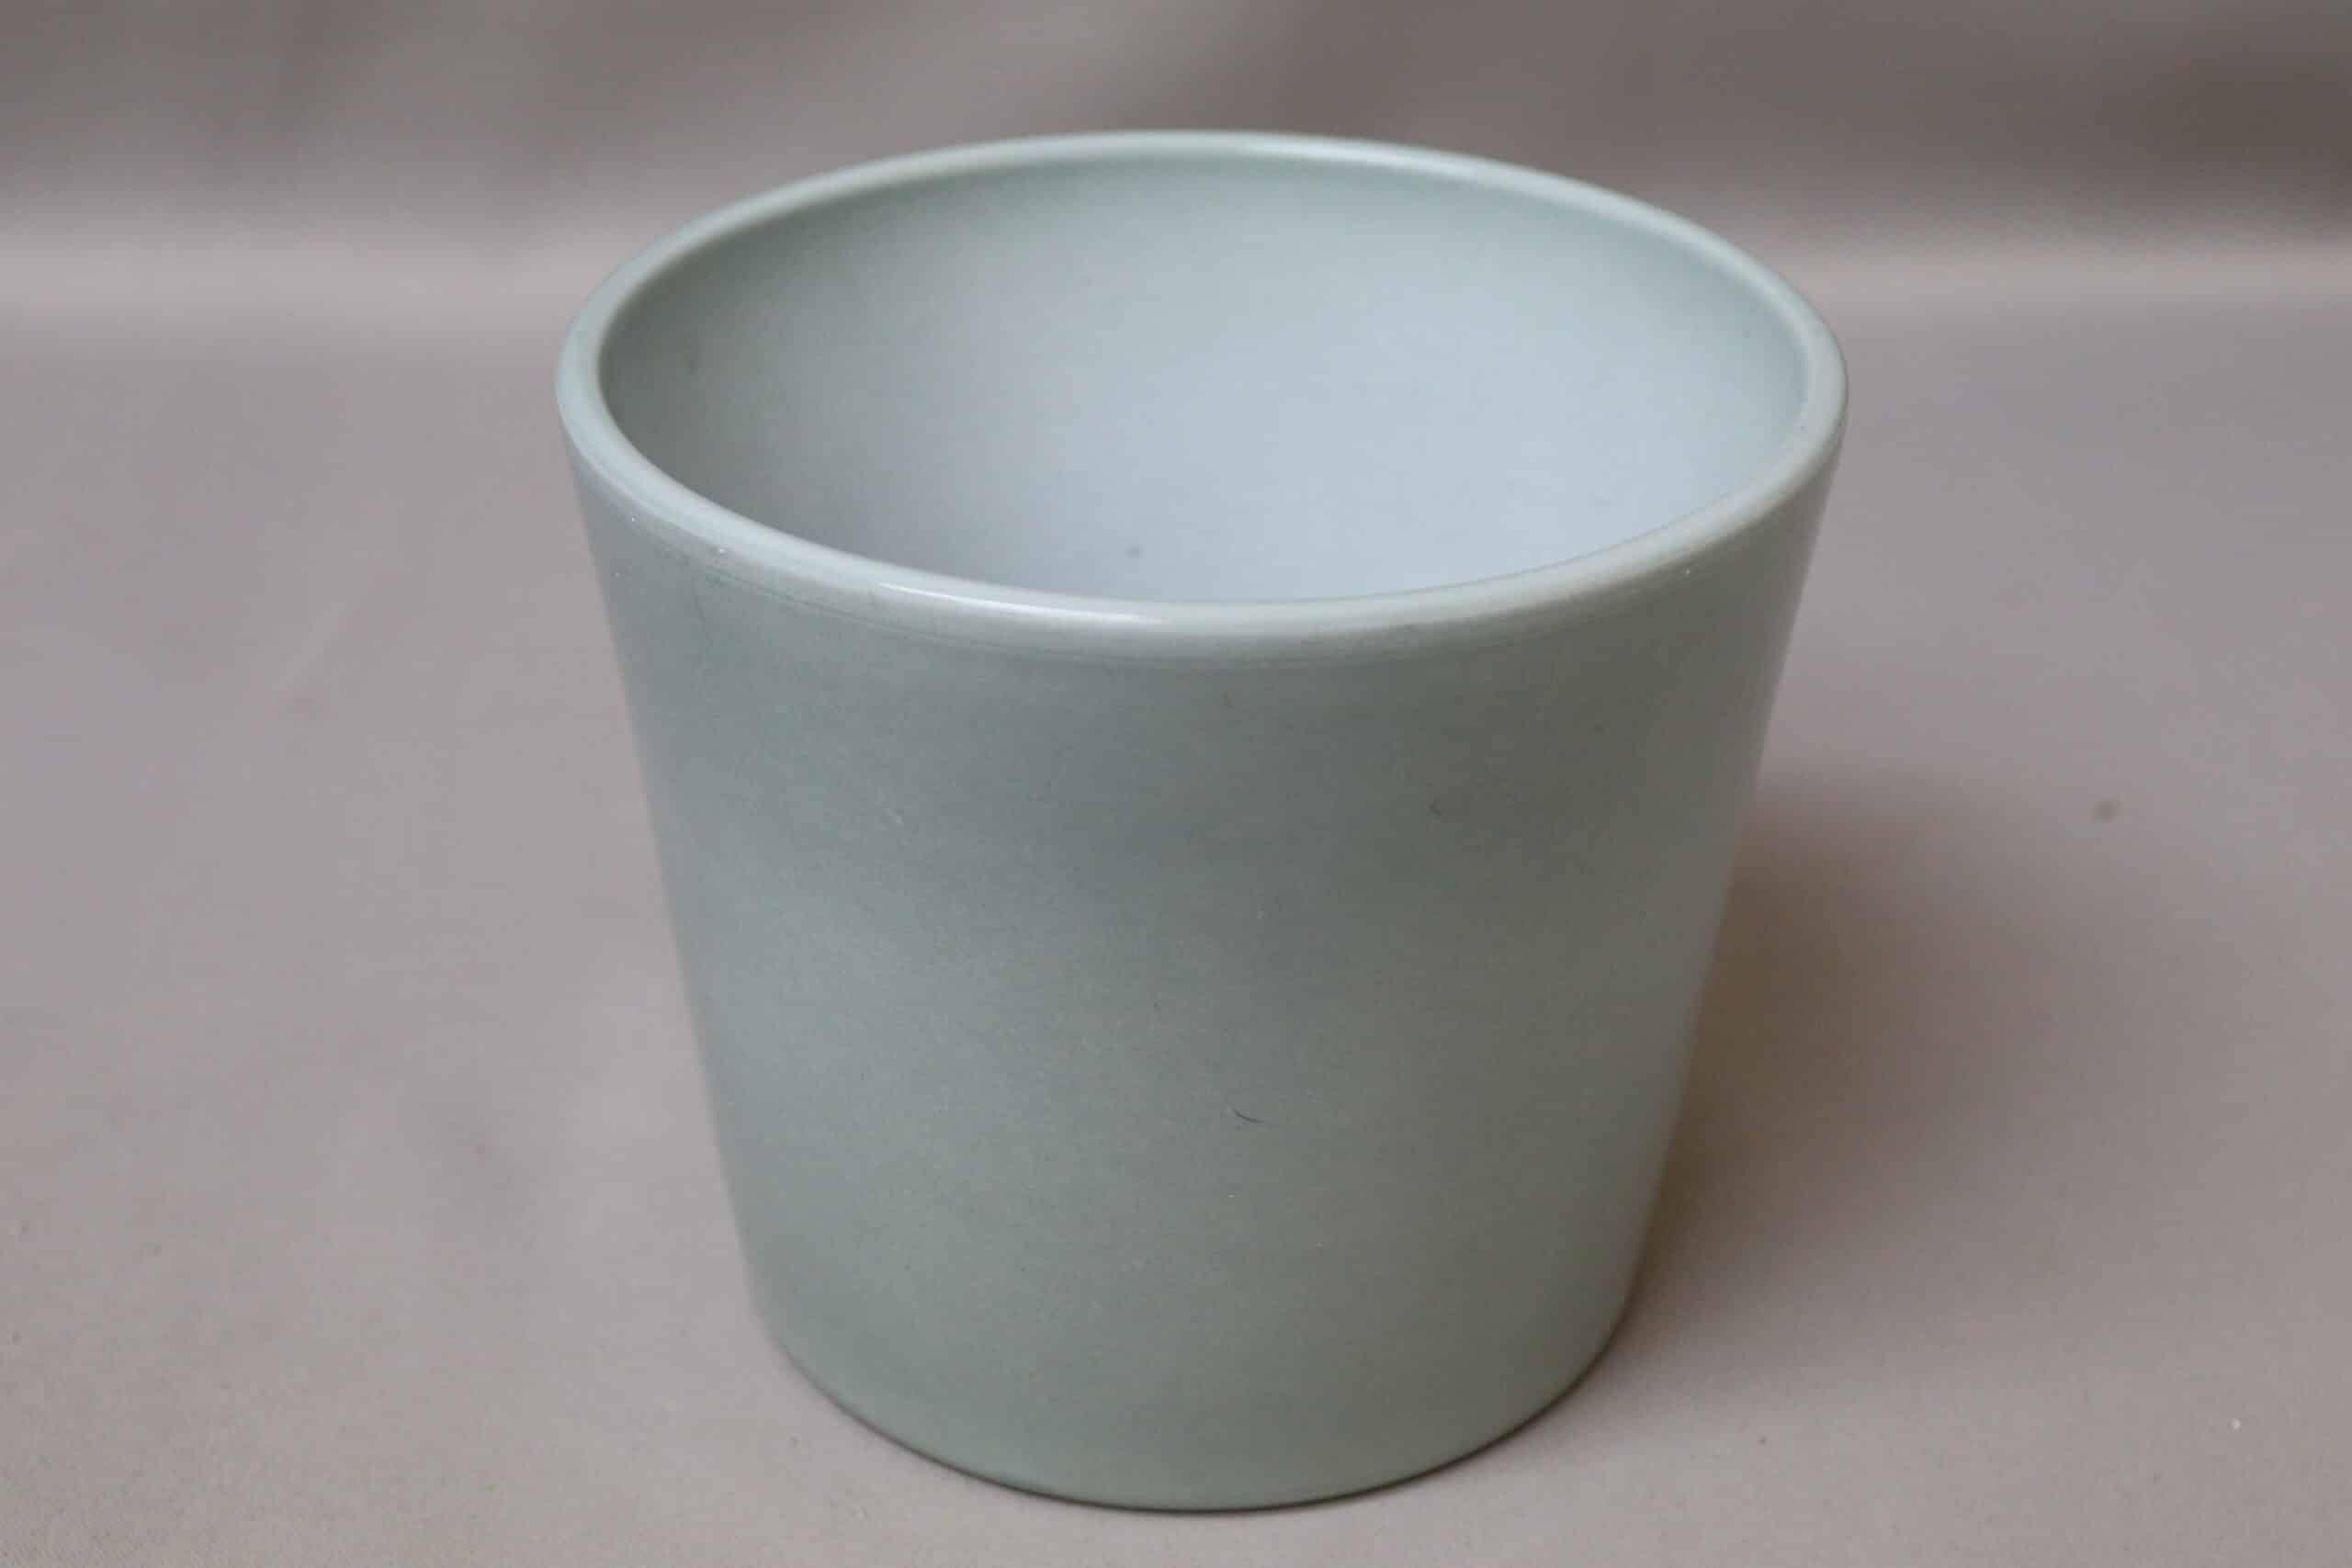 Smooth light jade green pot cover for potted plants.